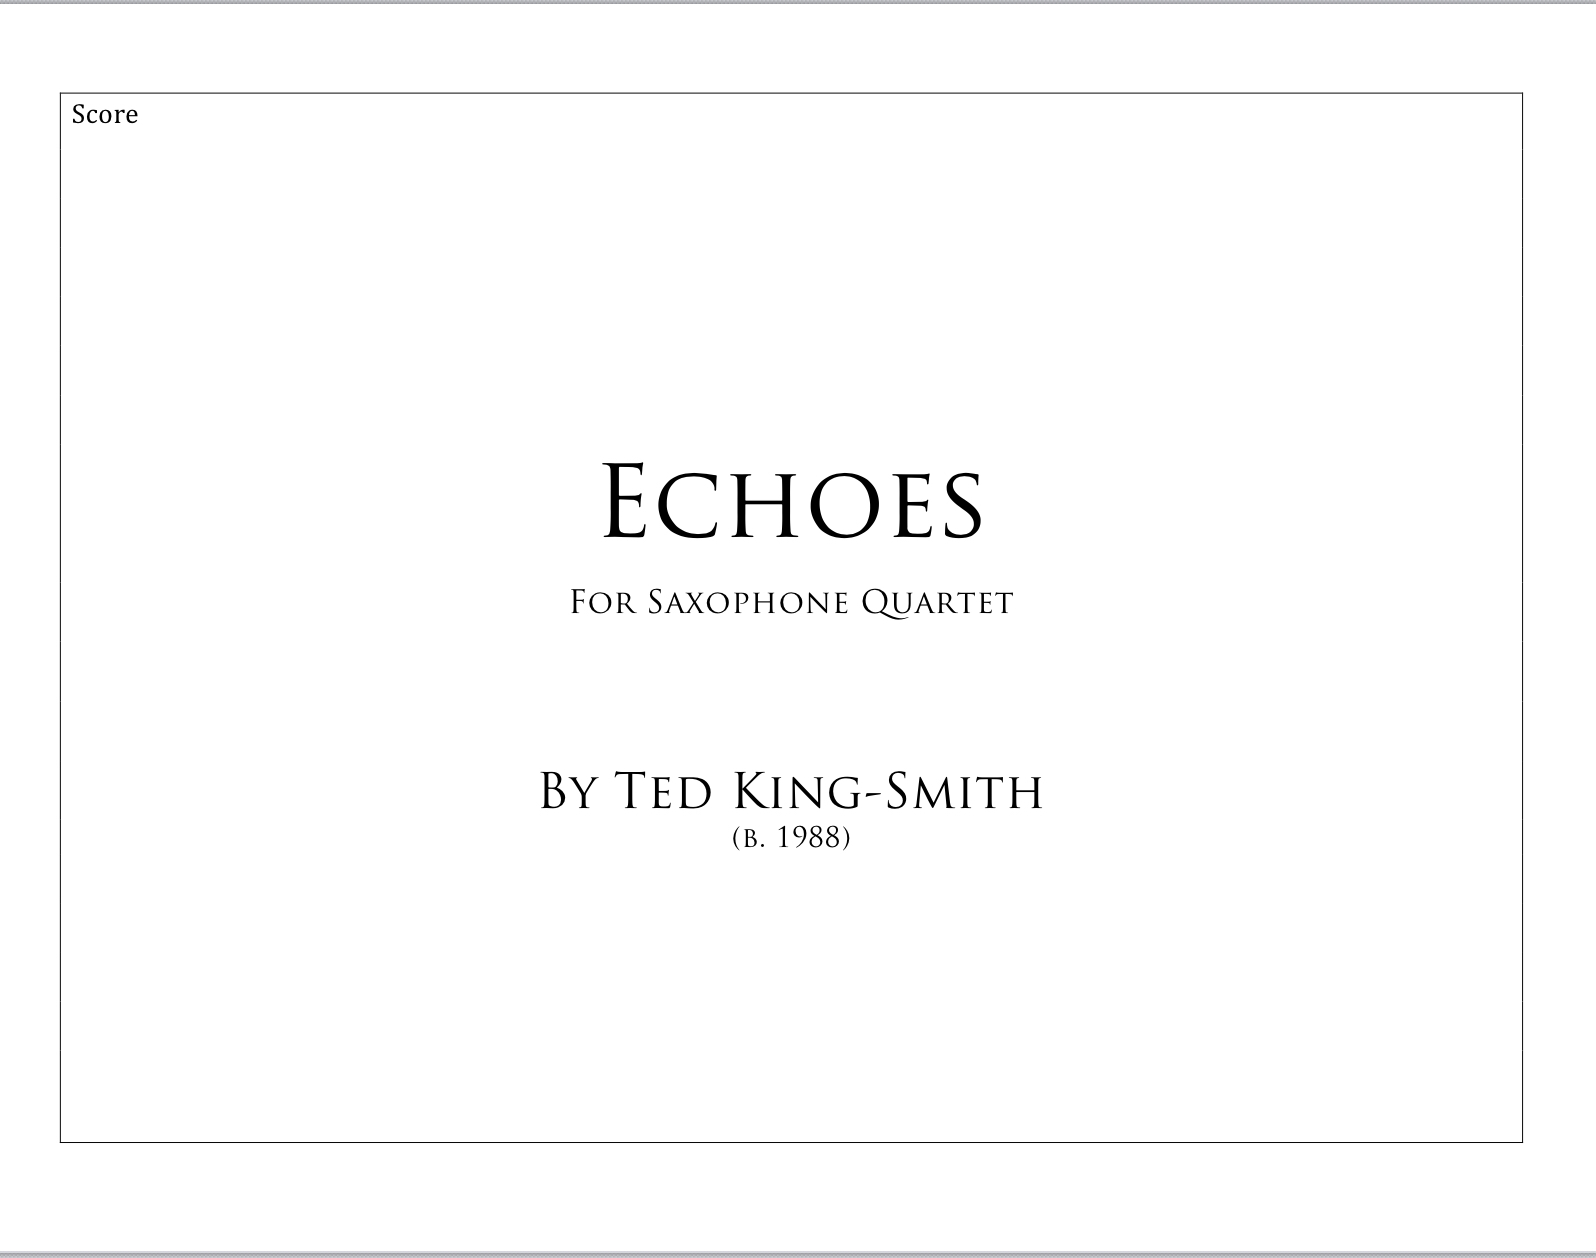 Echoes by Ted King-Smith